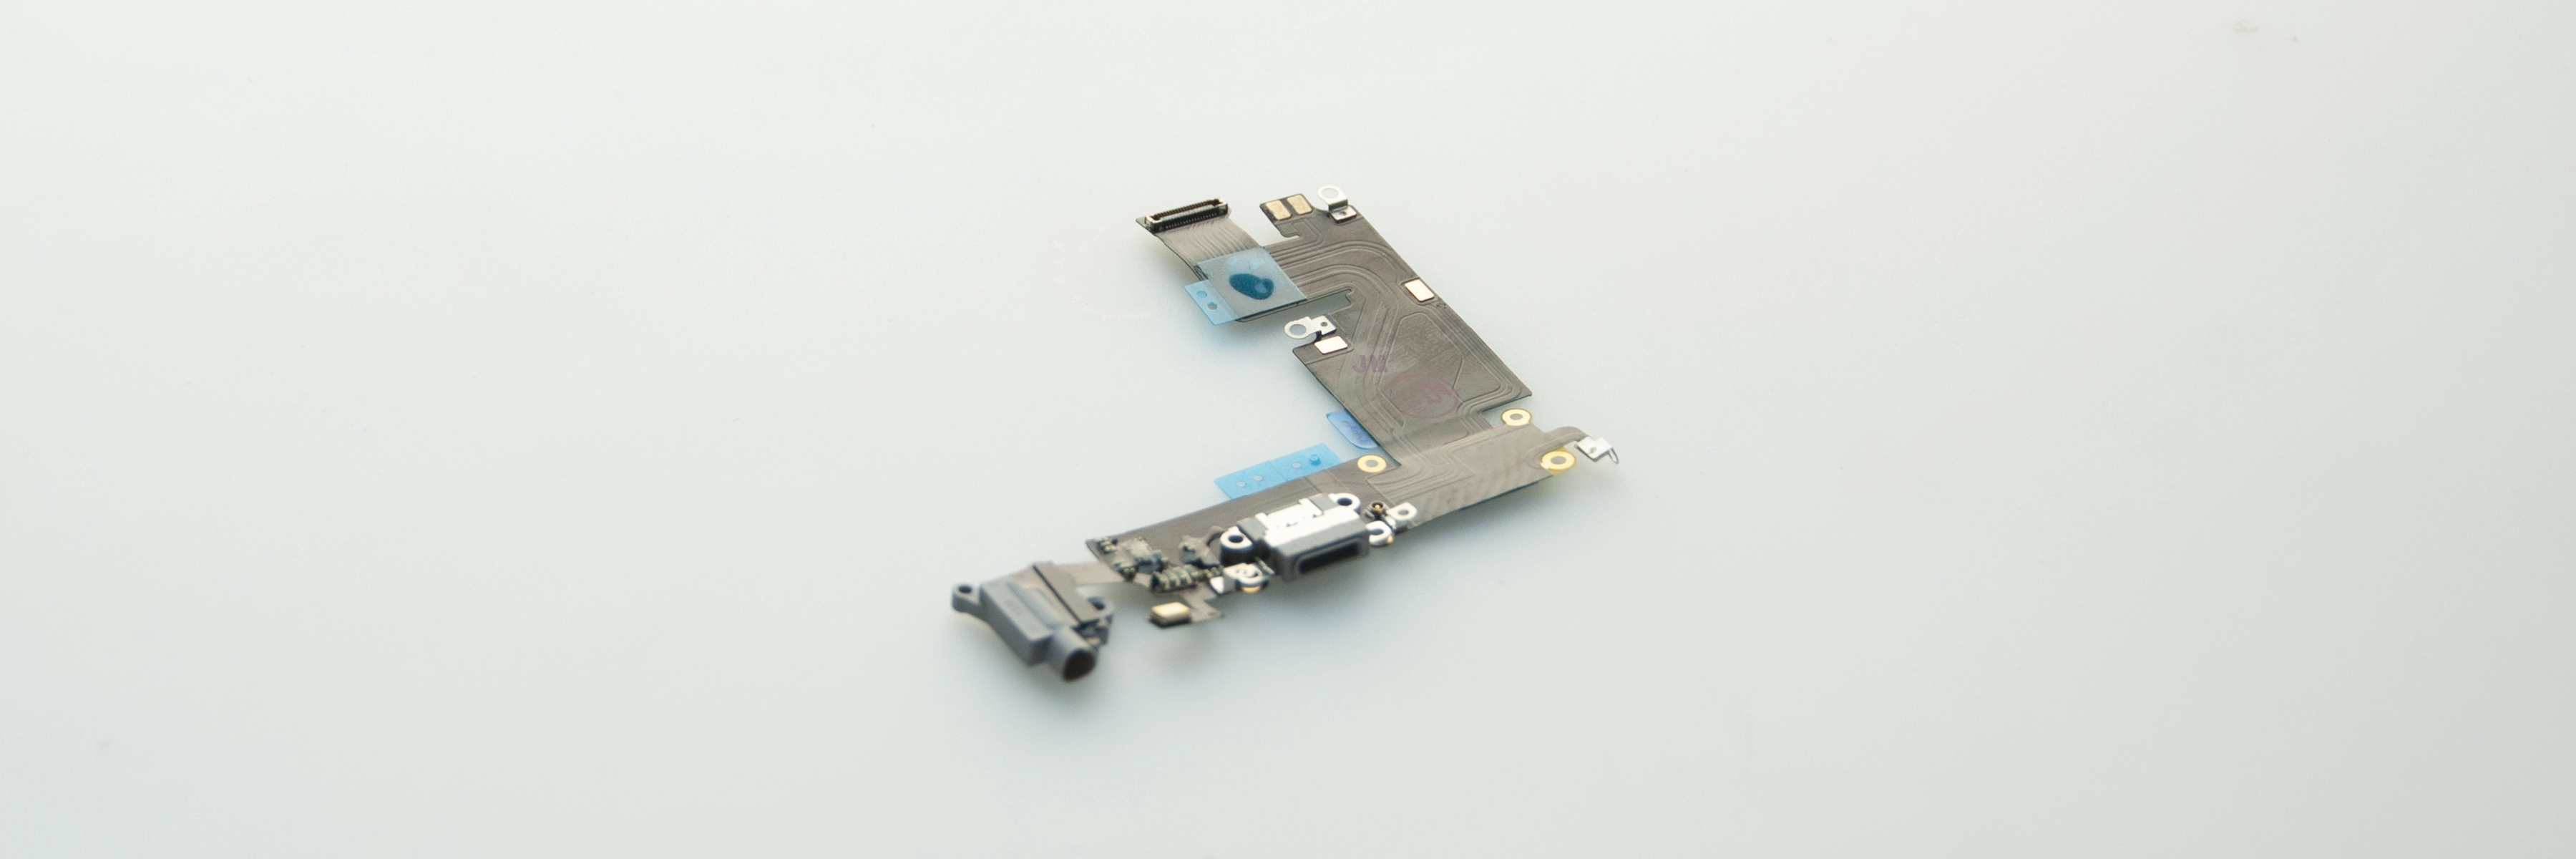 IPhone 6S lightning connector assembly replacement.